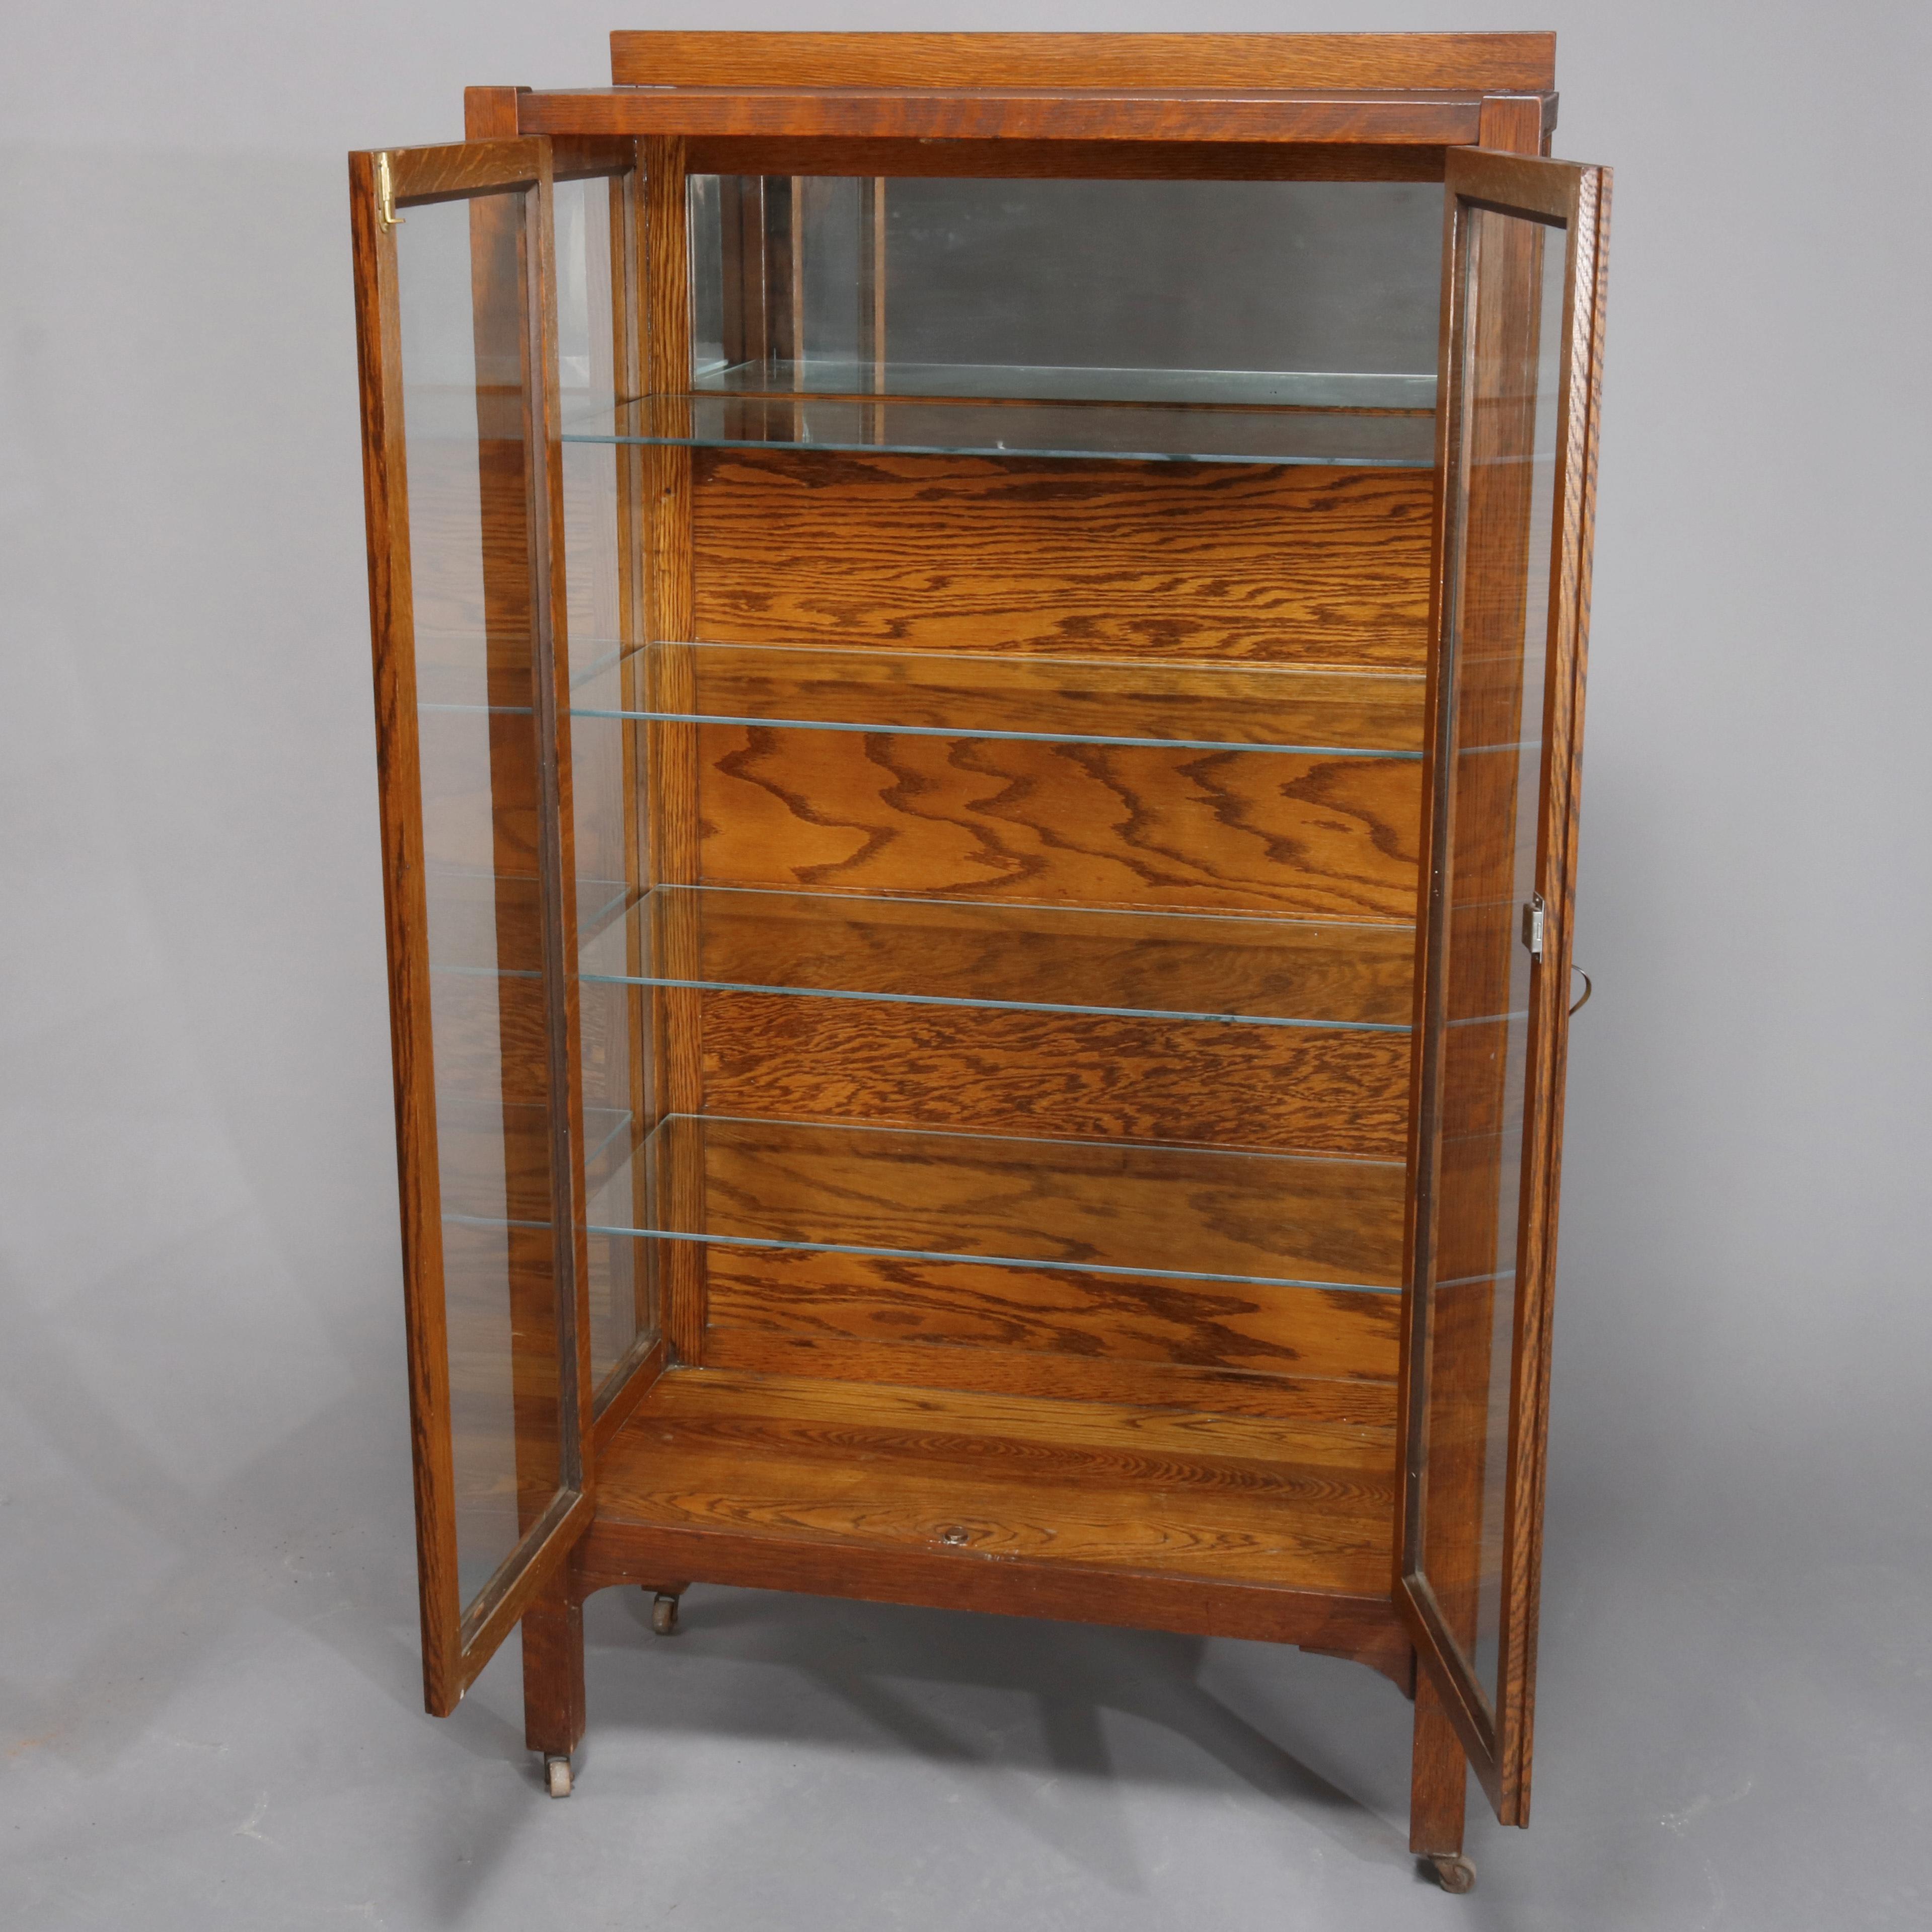 An antique Arts & Crafts mission oak china cabinet offers oak construction with low backsplash surmounting case having glass sides and double glass doors opening to partially mirrored and shelved interior, raised on straight and square legs with